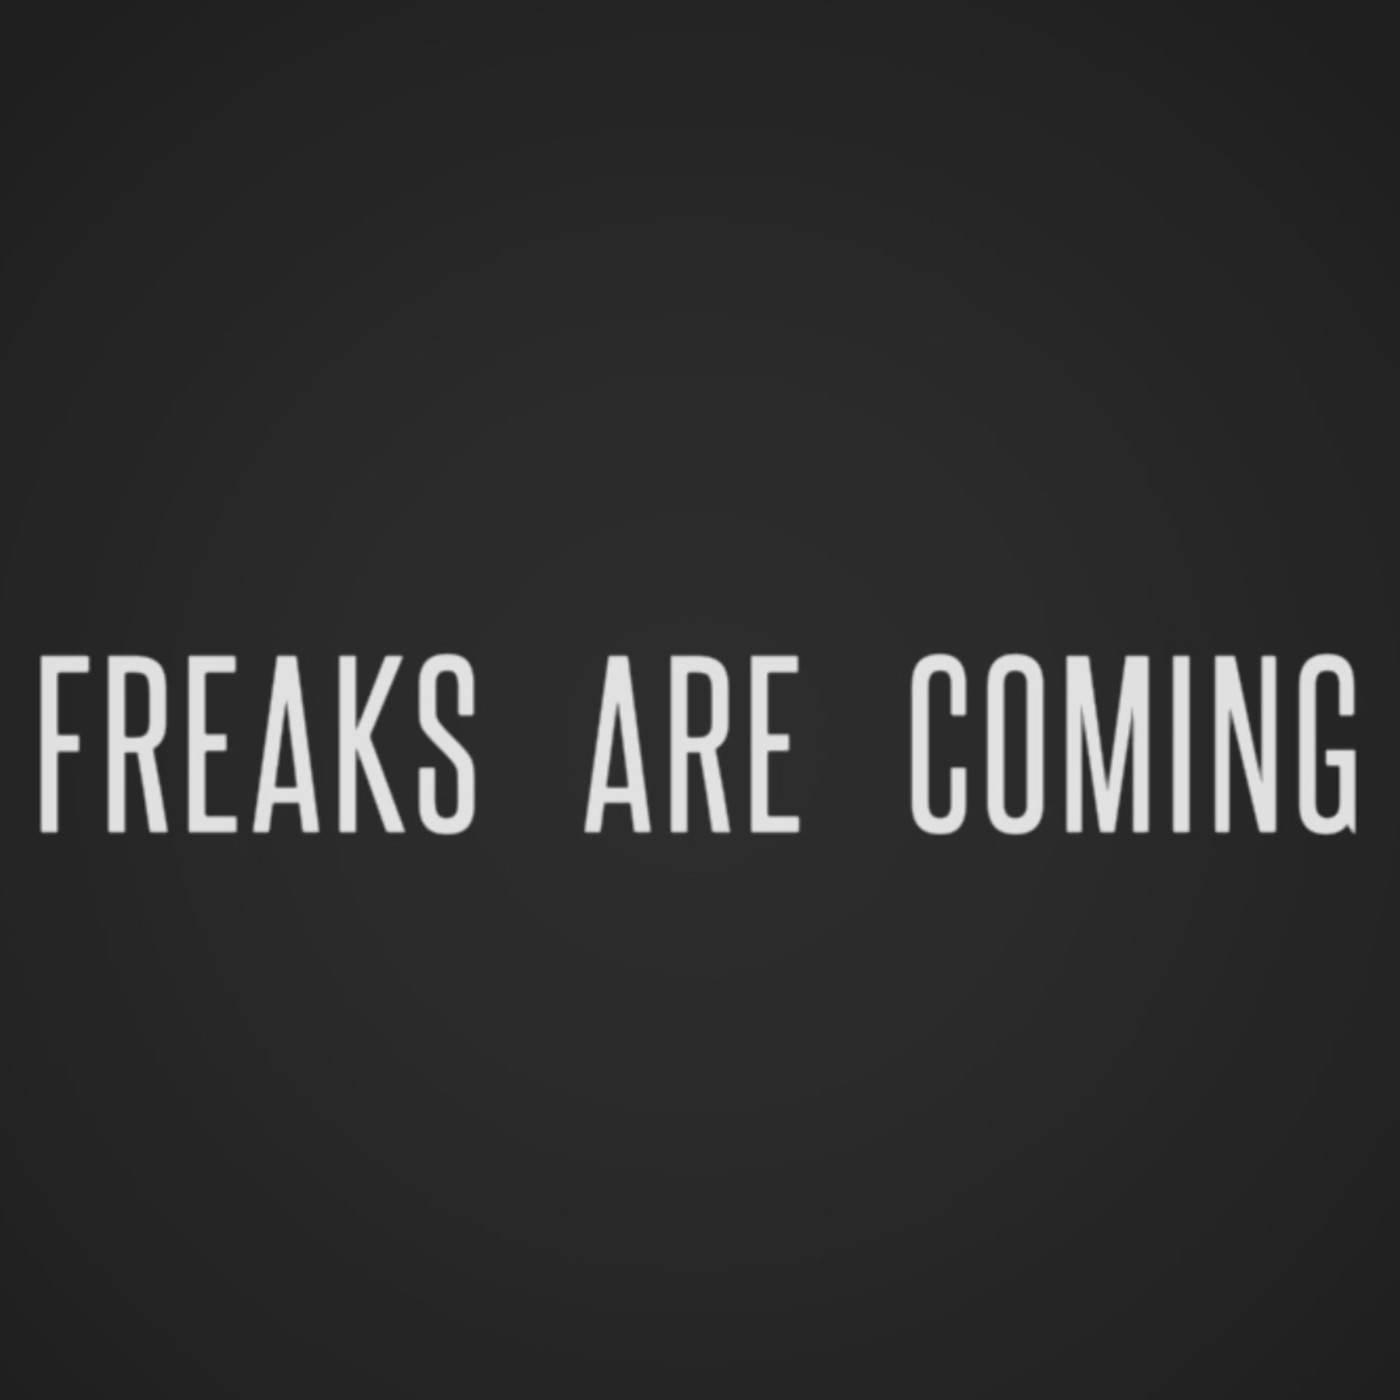 Freaks are coming